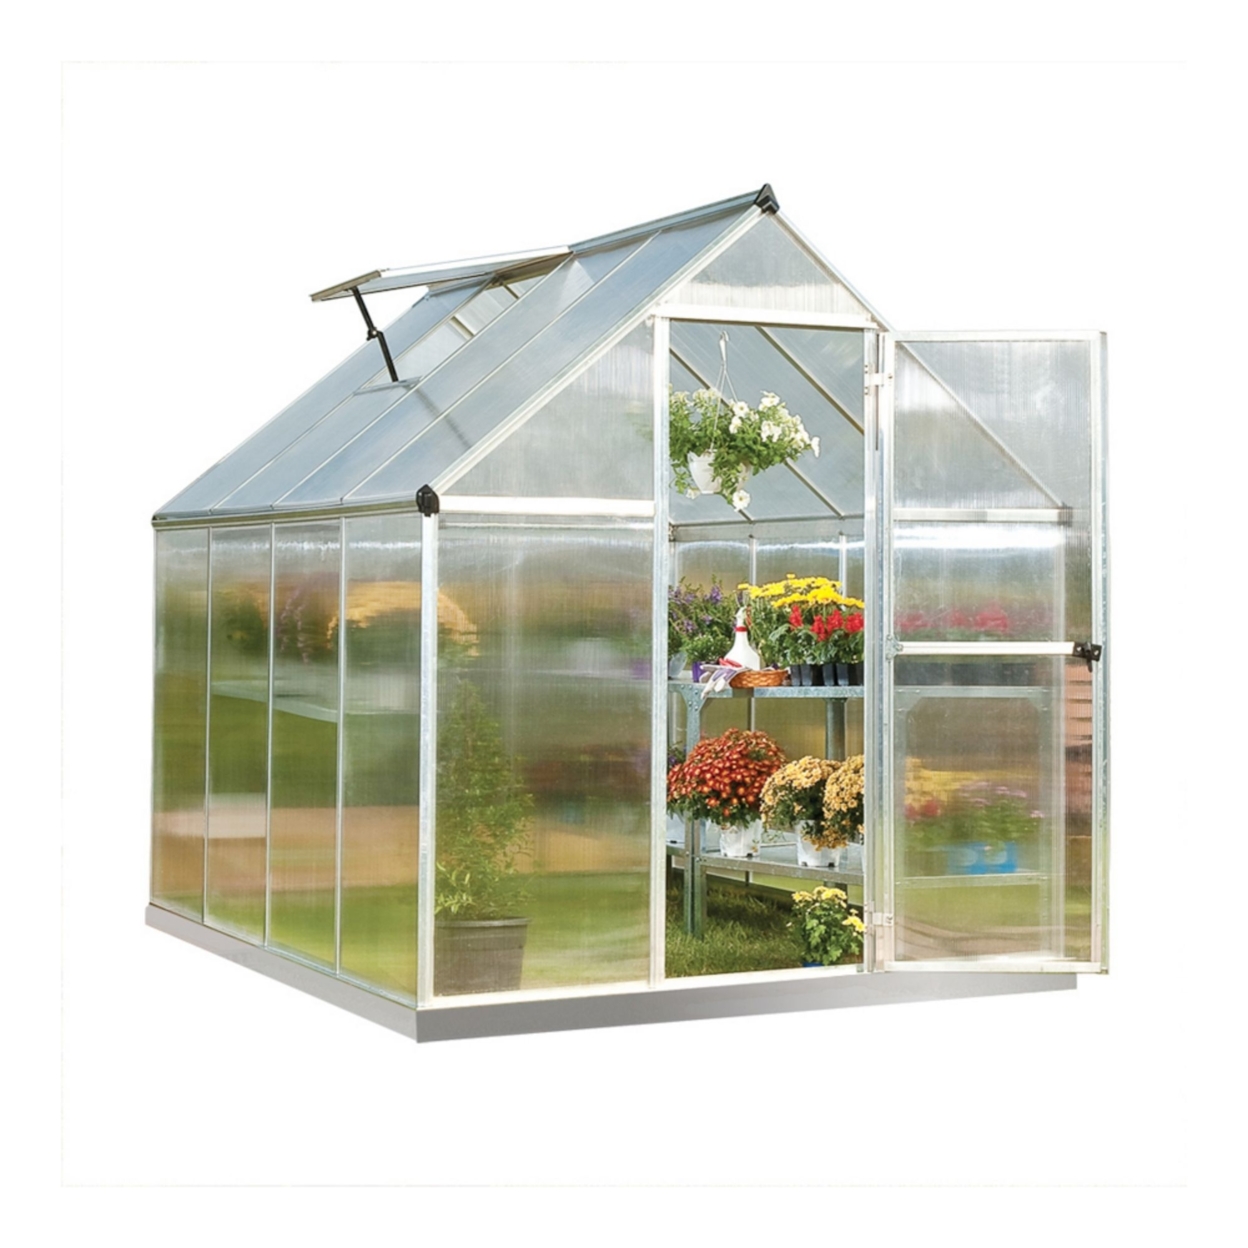 Palram - Canopia Mythos 6' x 8' Polycarbonate/Aluminum Walk-In Greenhouse – Silver - with Roof Vent - image 1 of 11